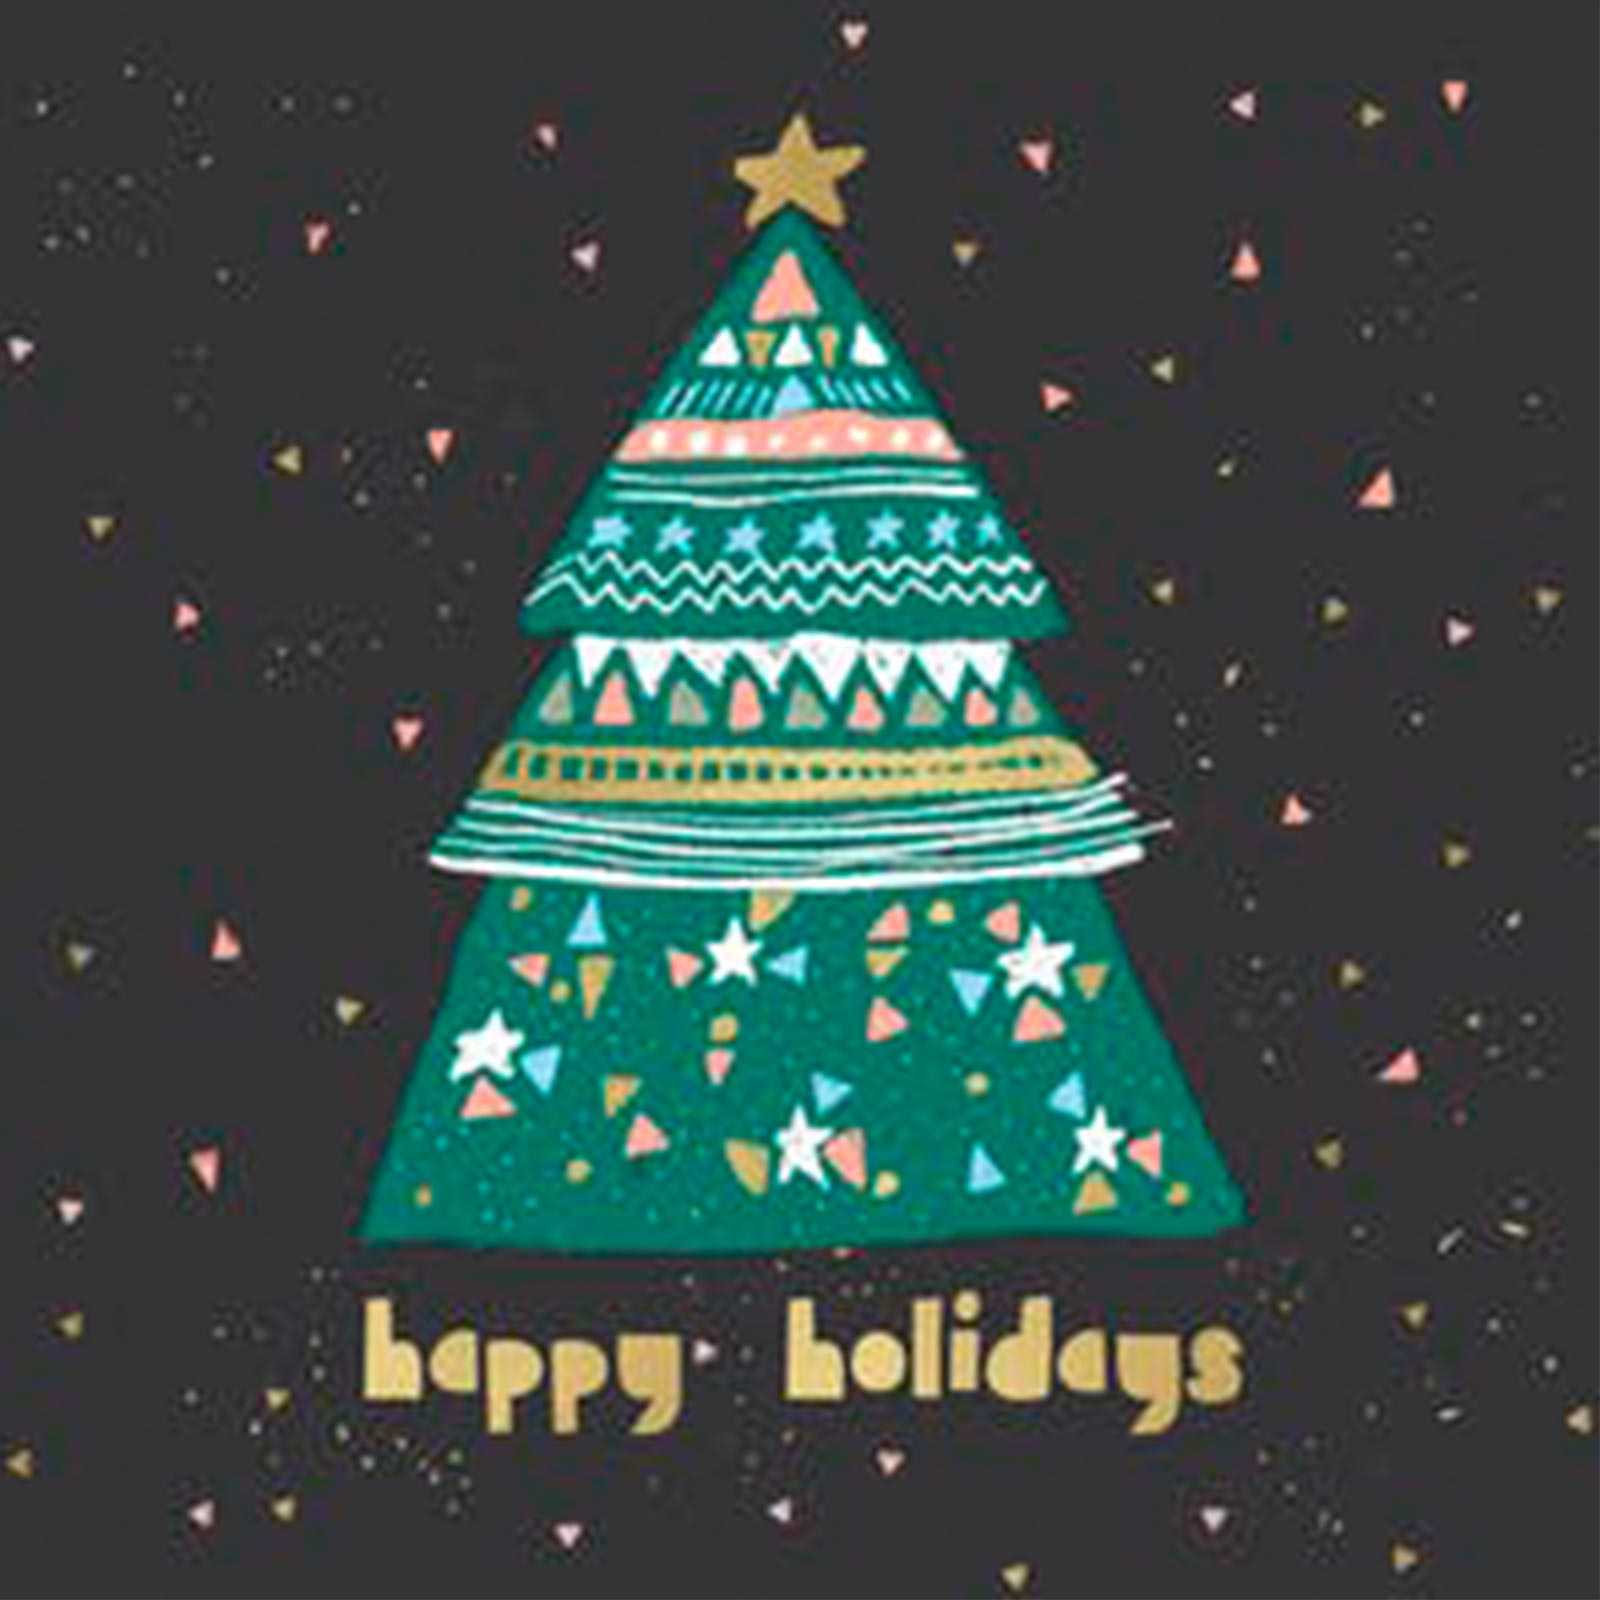 Free Christmas Cards To Print Out And Send This Year Within Diy Christmas Card Templates